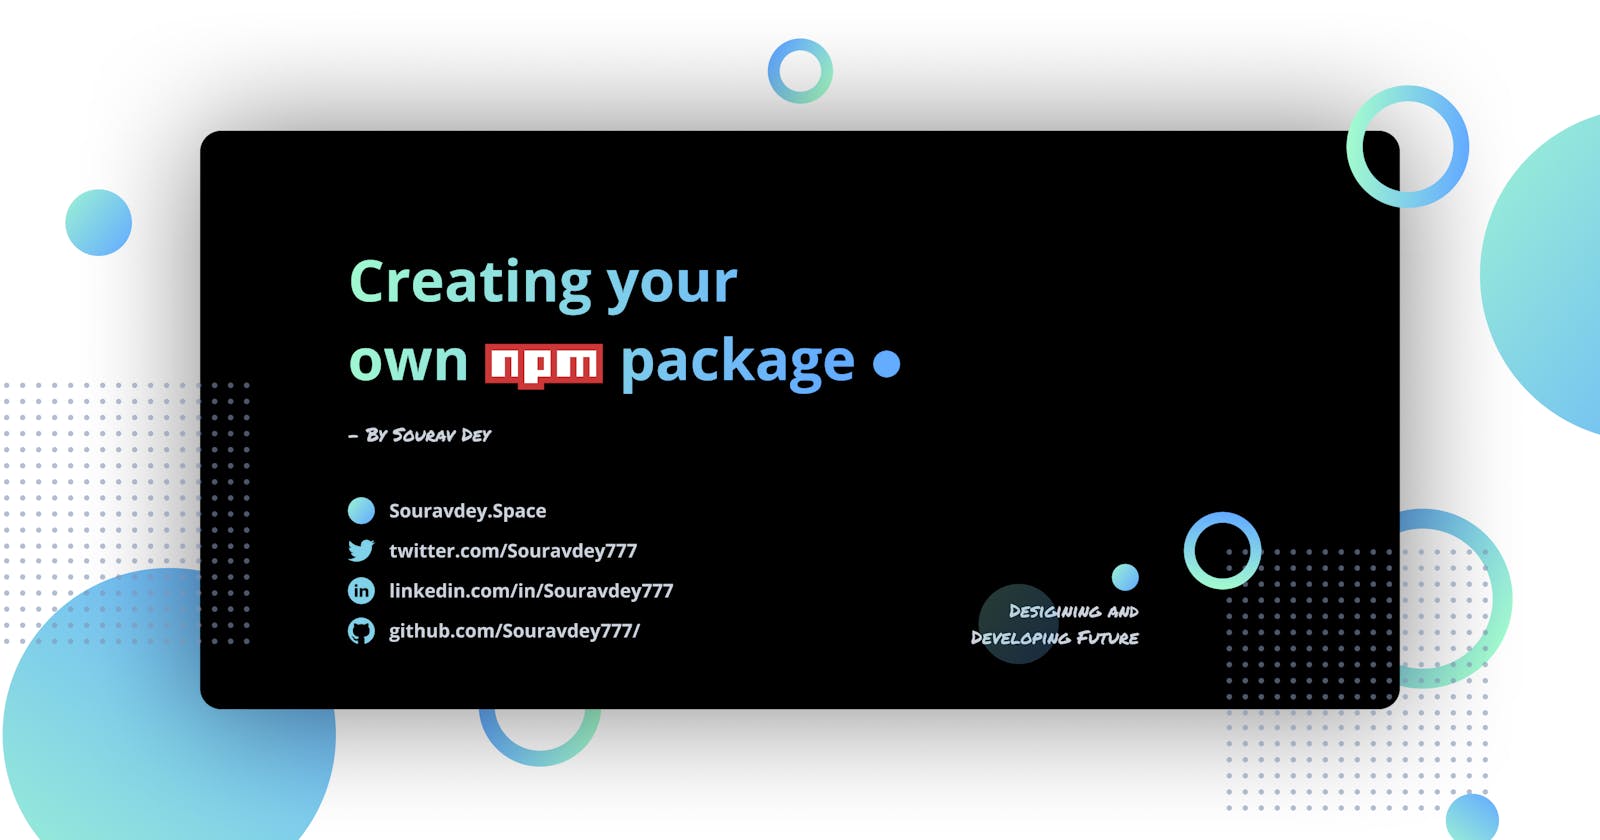 ⚡ TIL: Creating your own npm package